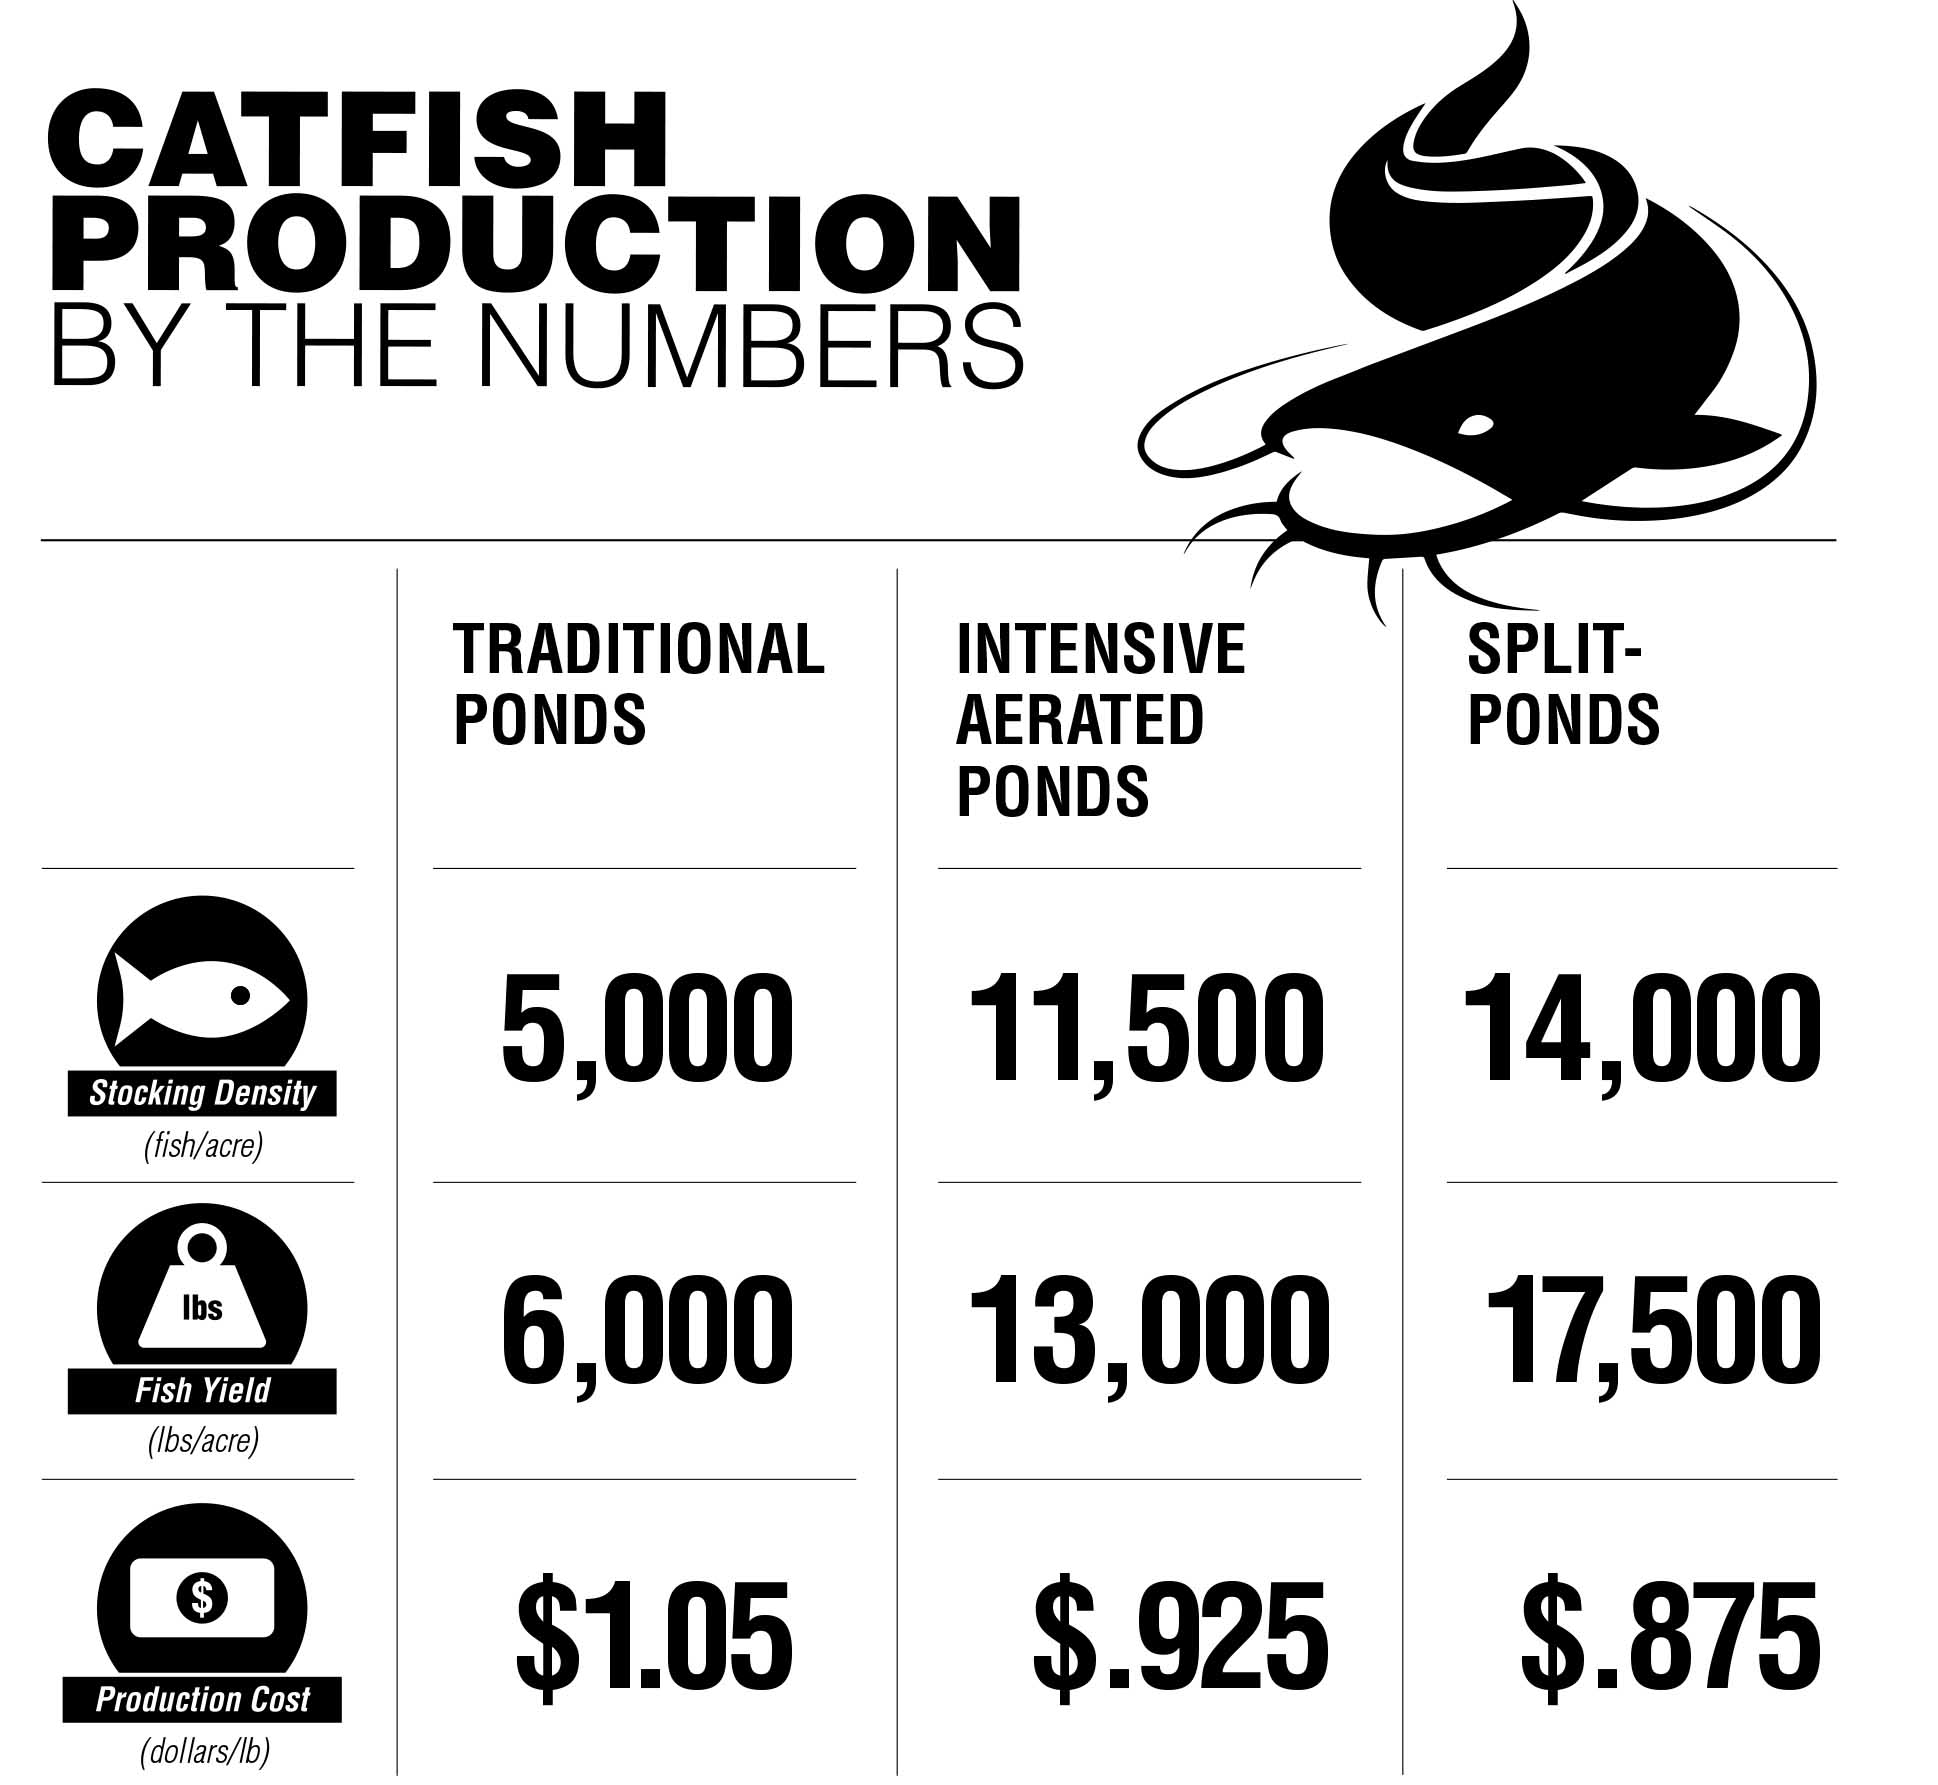 Catfish Production By The Numbers